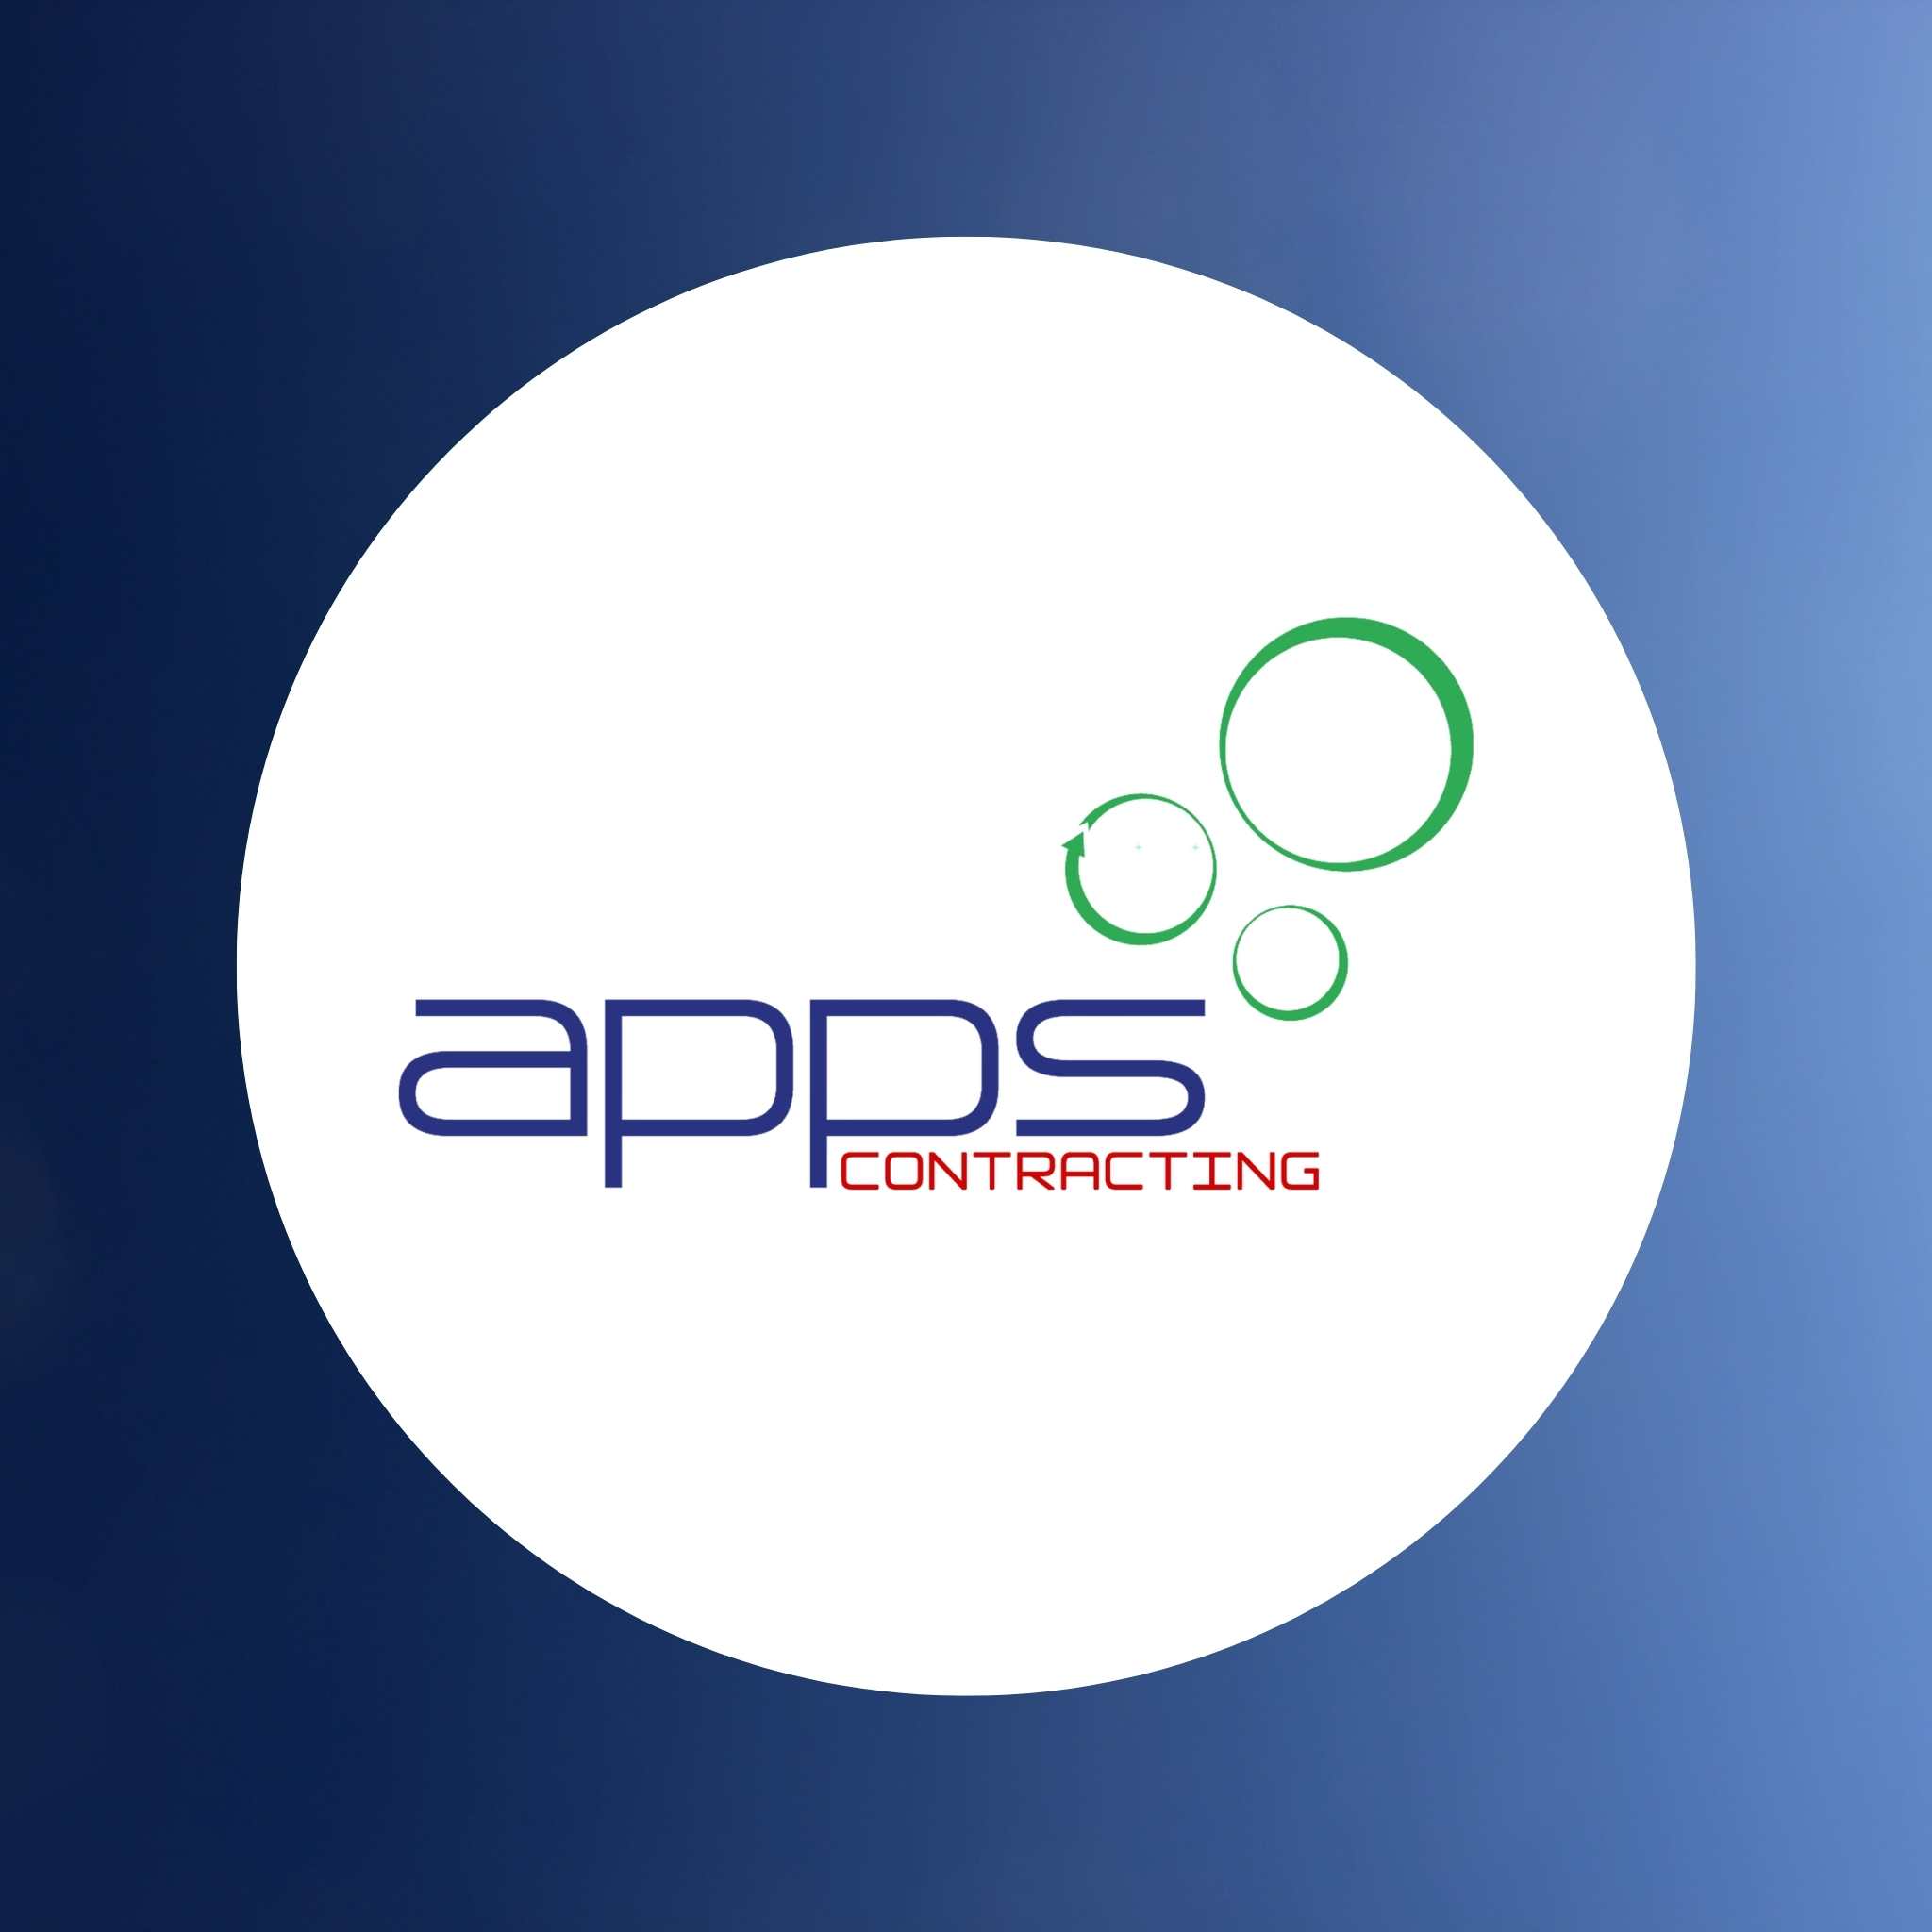 APPS Contracting